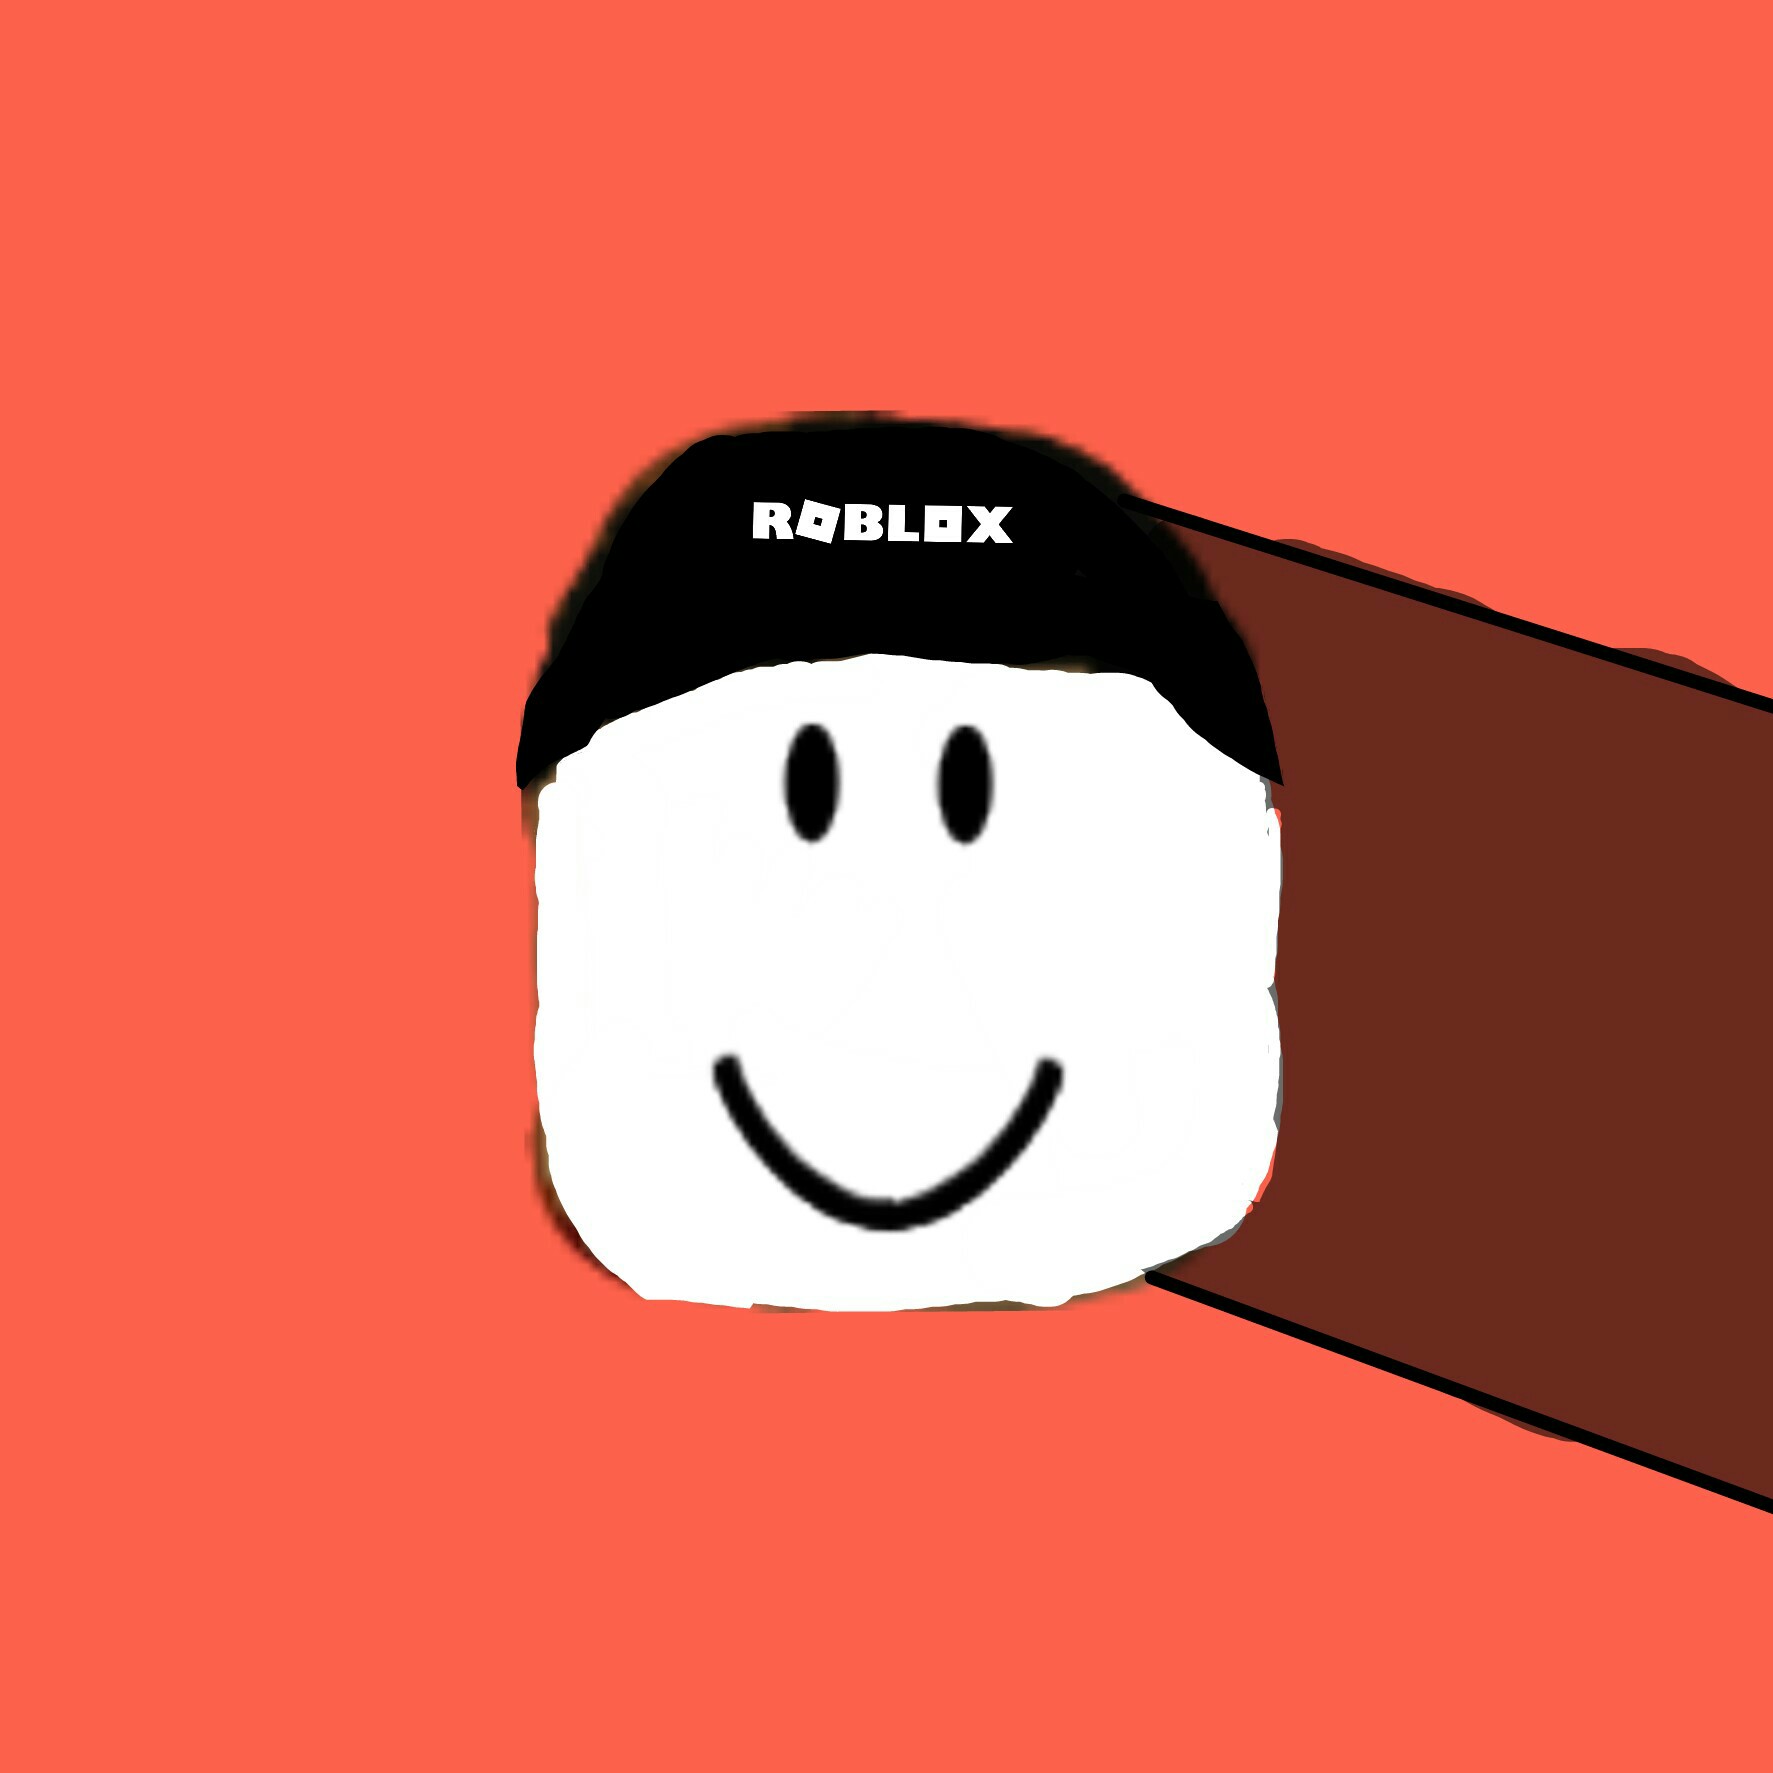 Roblox Real Character Image By Domination1isme - roblox with no face image by domination1isme